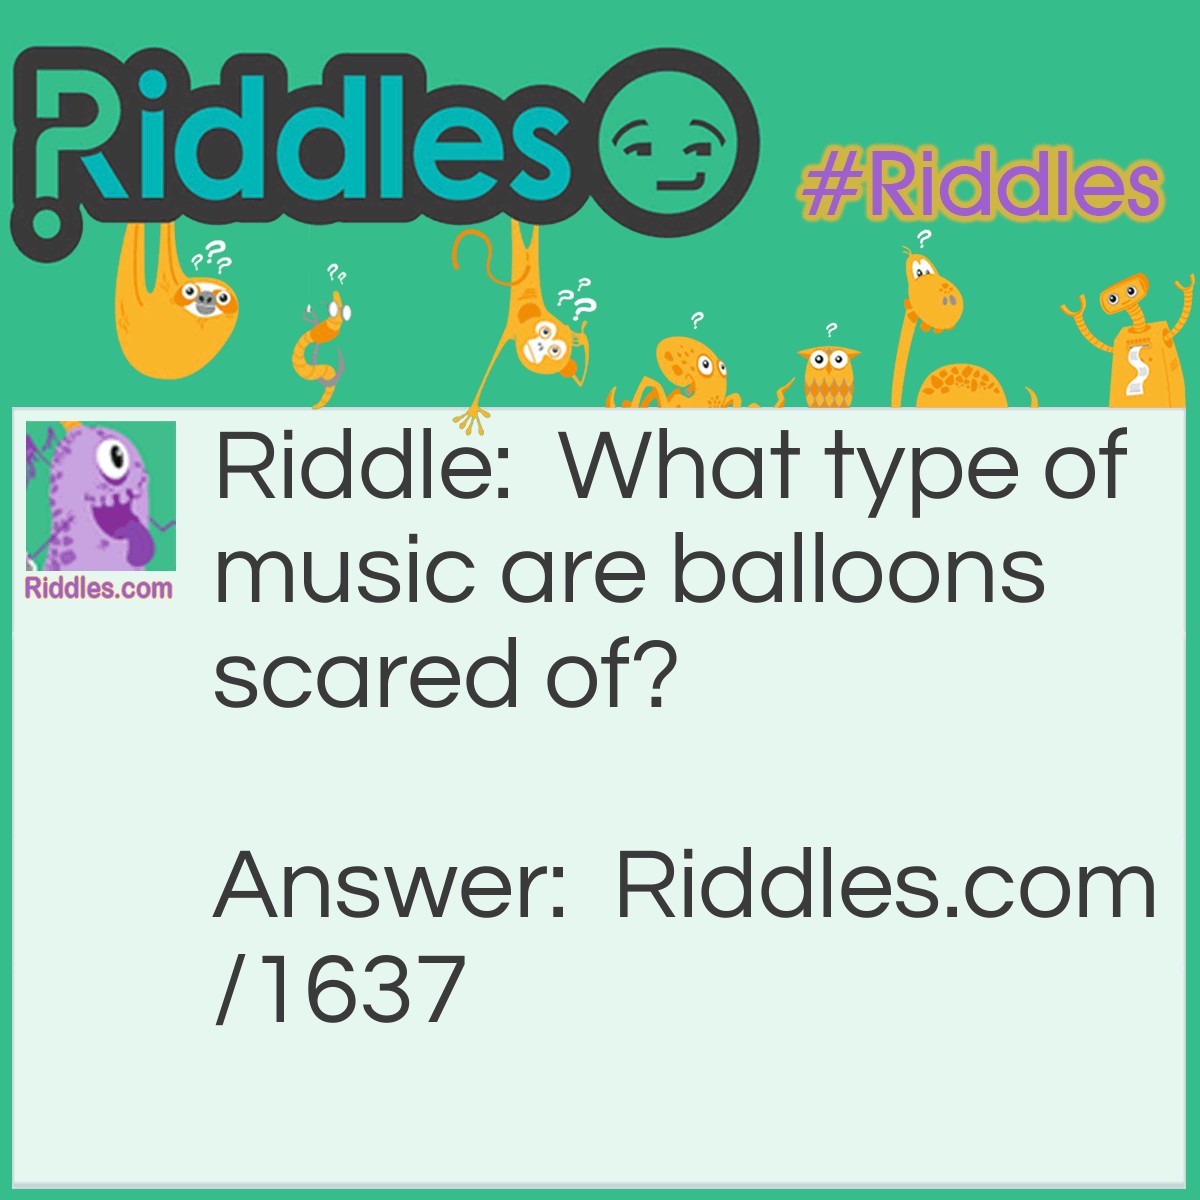 Riddle: What type of music are balloons scared of? Answer: Pop Music!